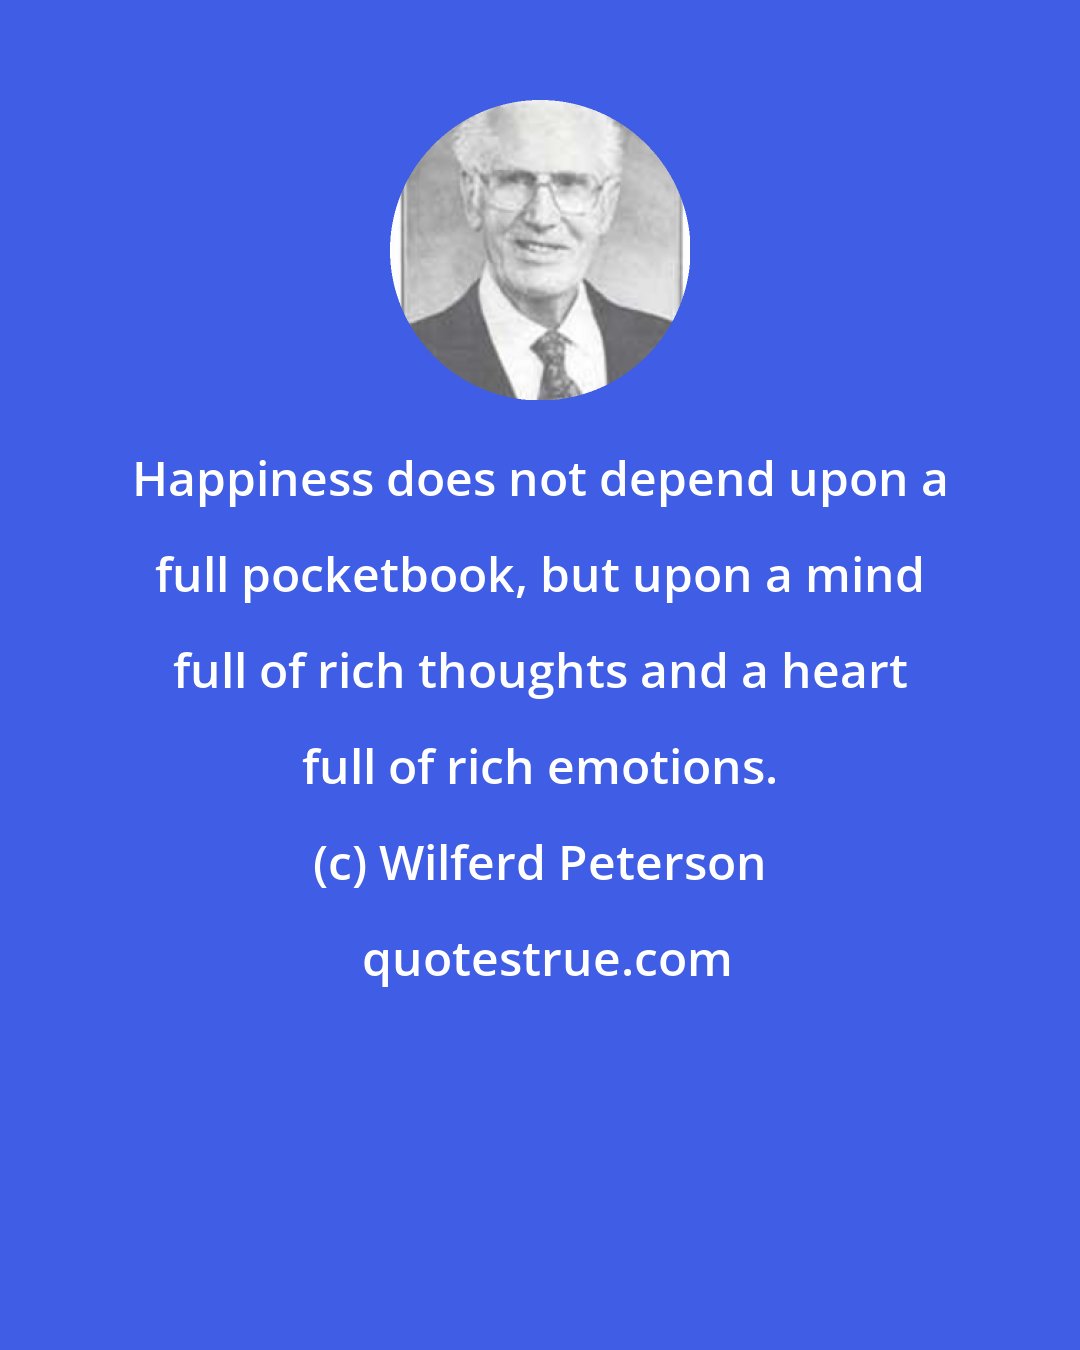 Wilferd Peterson: Happiness does not depend upon a full pocketbook, but upon a mind full of rich thoughts and a heart full of rich emotions.